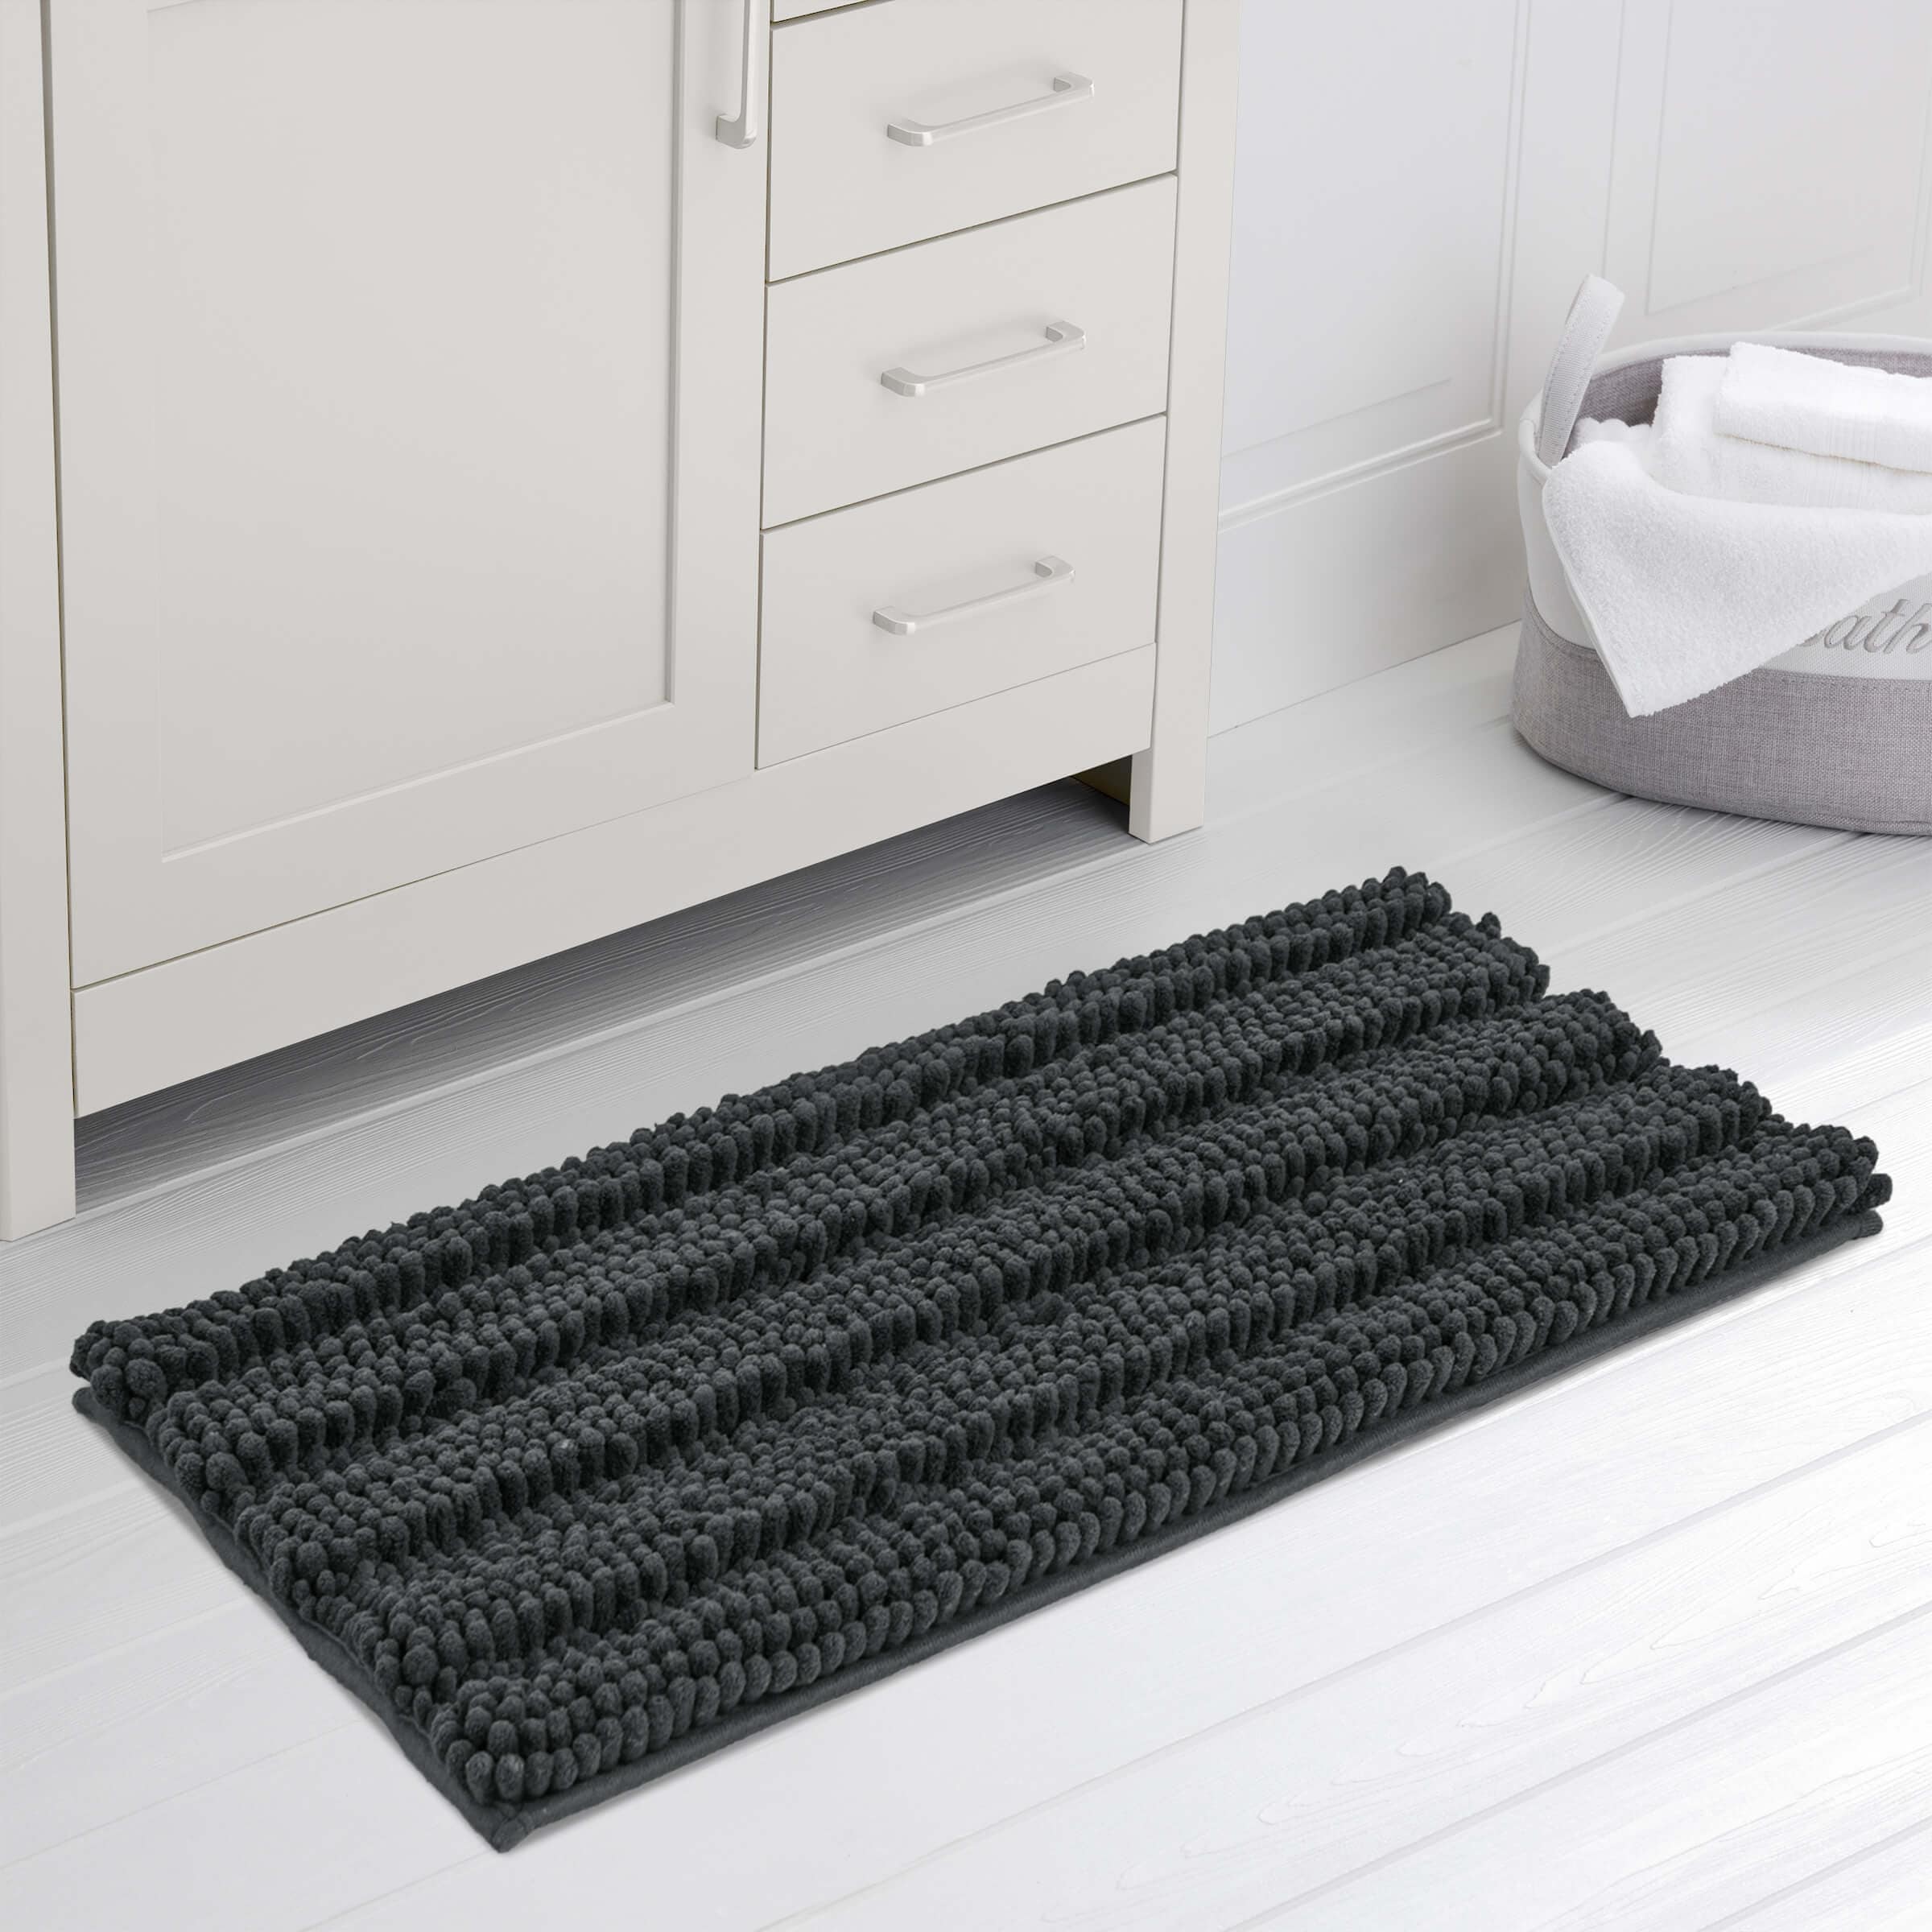 https://ak1.ostkcdn.com/images/products/is/images/direct/bfc0e49a7c46d35780e2b03e8e2588f5081b88f4/Subrtex-Supersoft-and-Absorbent-Braided-Bathroom-Rugs-Chenille-Bath-Rugs.jpg